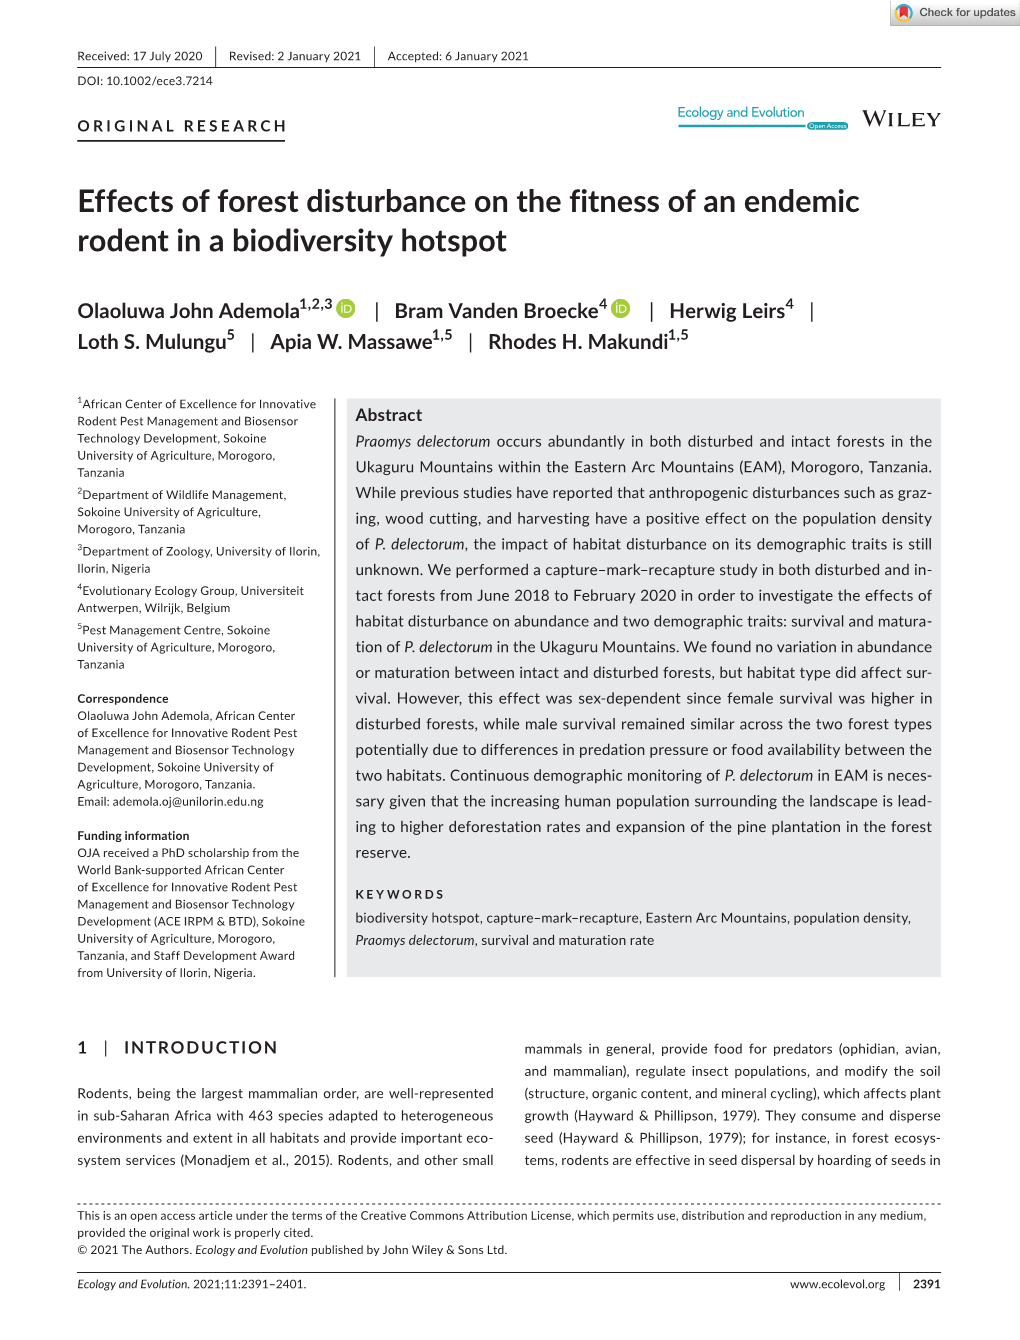 Effects of Forest Disturbance on the Fitness of an Endemic Rodent in a Biodiversity Hotspot